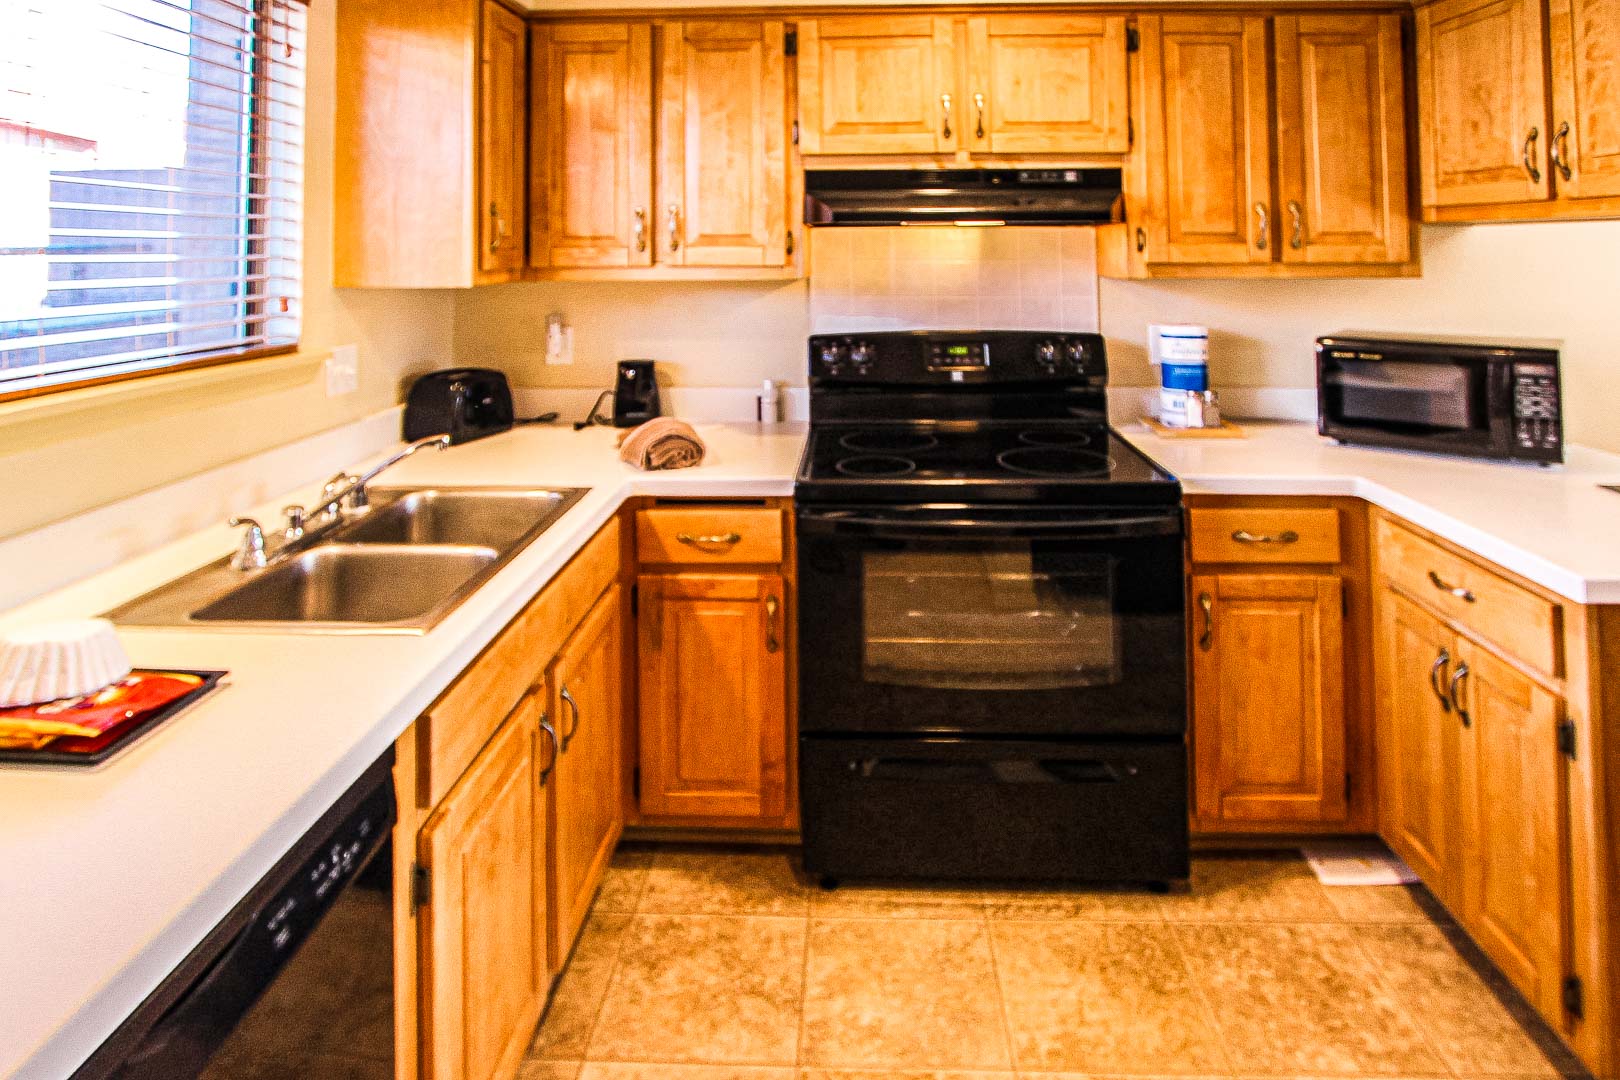 A standard kitchen at VRI's Crown Point Condominiums in New Mexico.